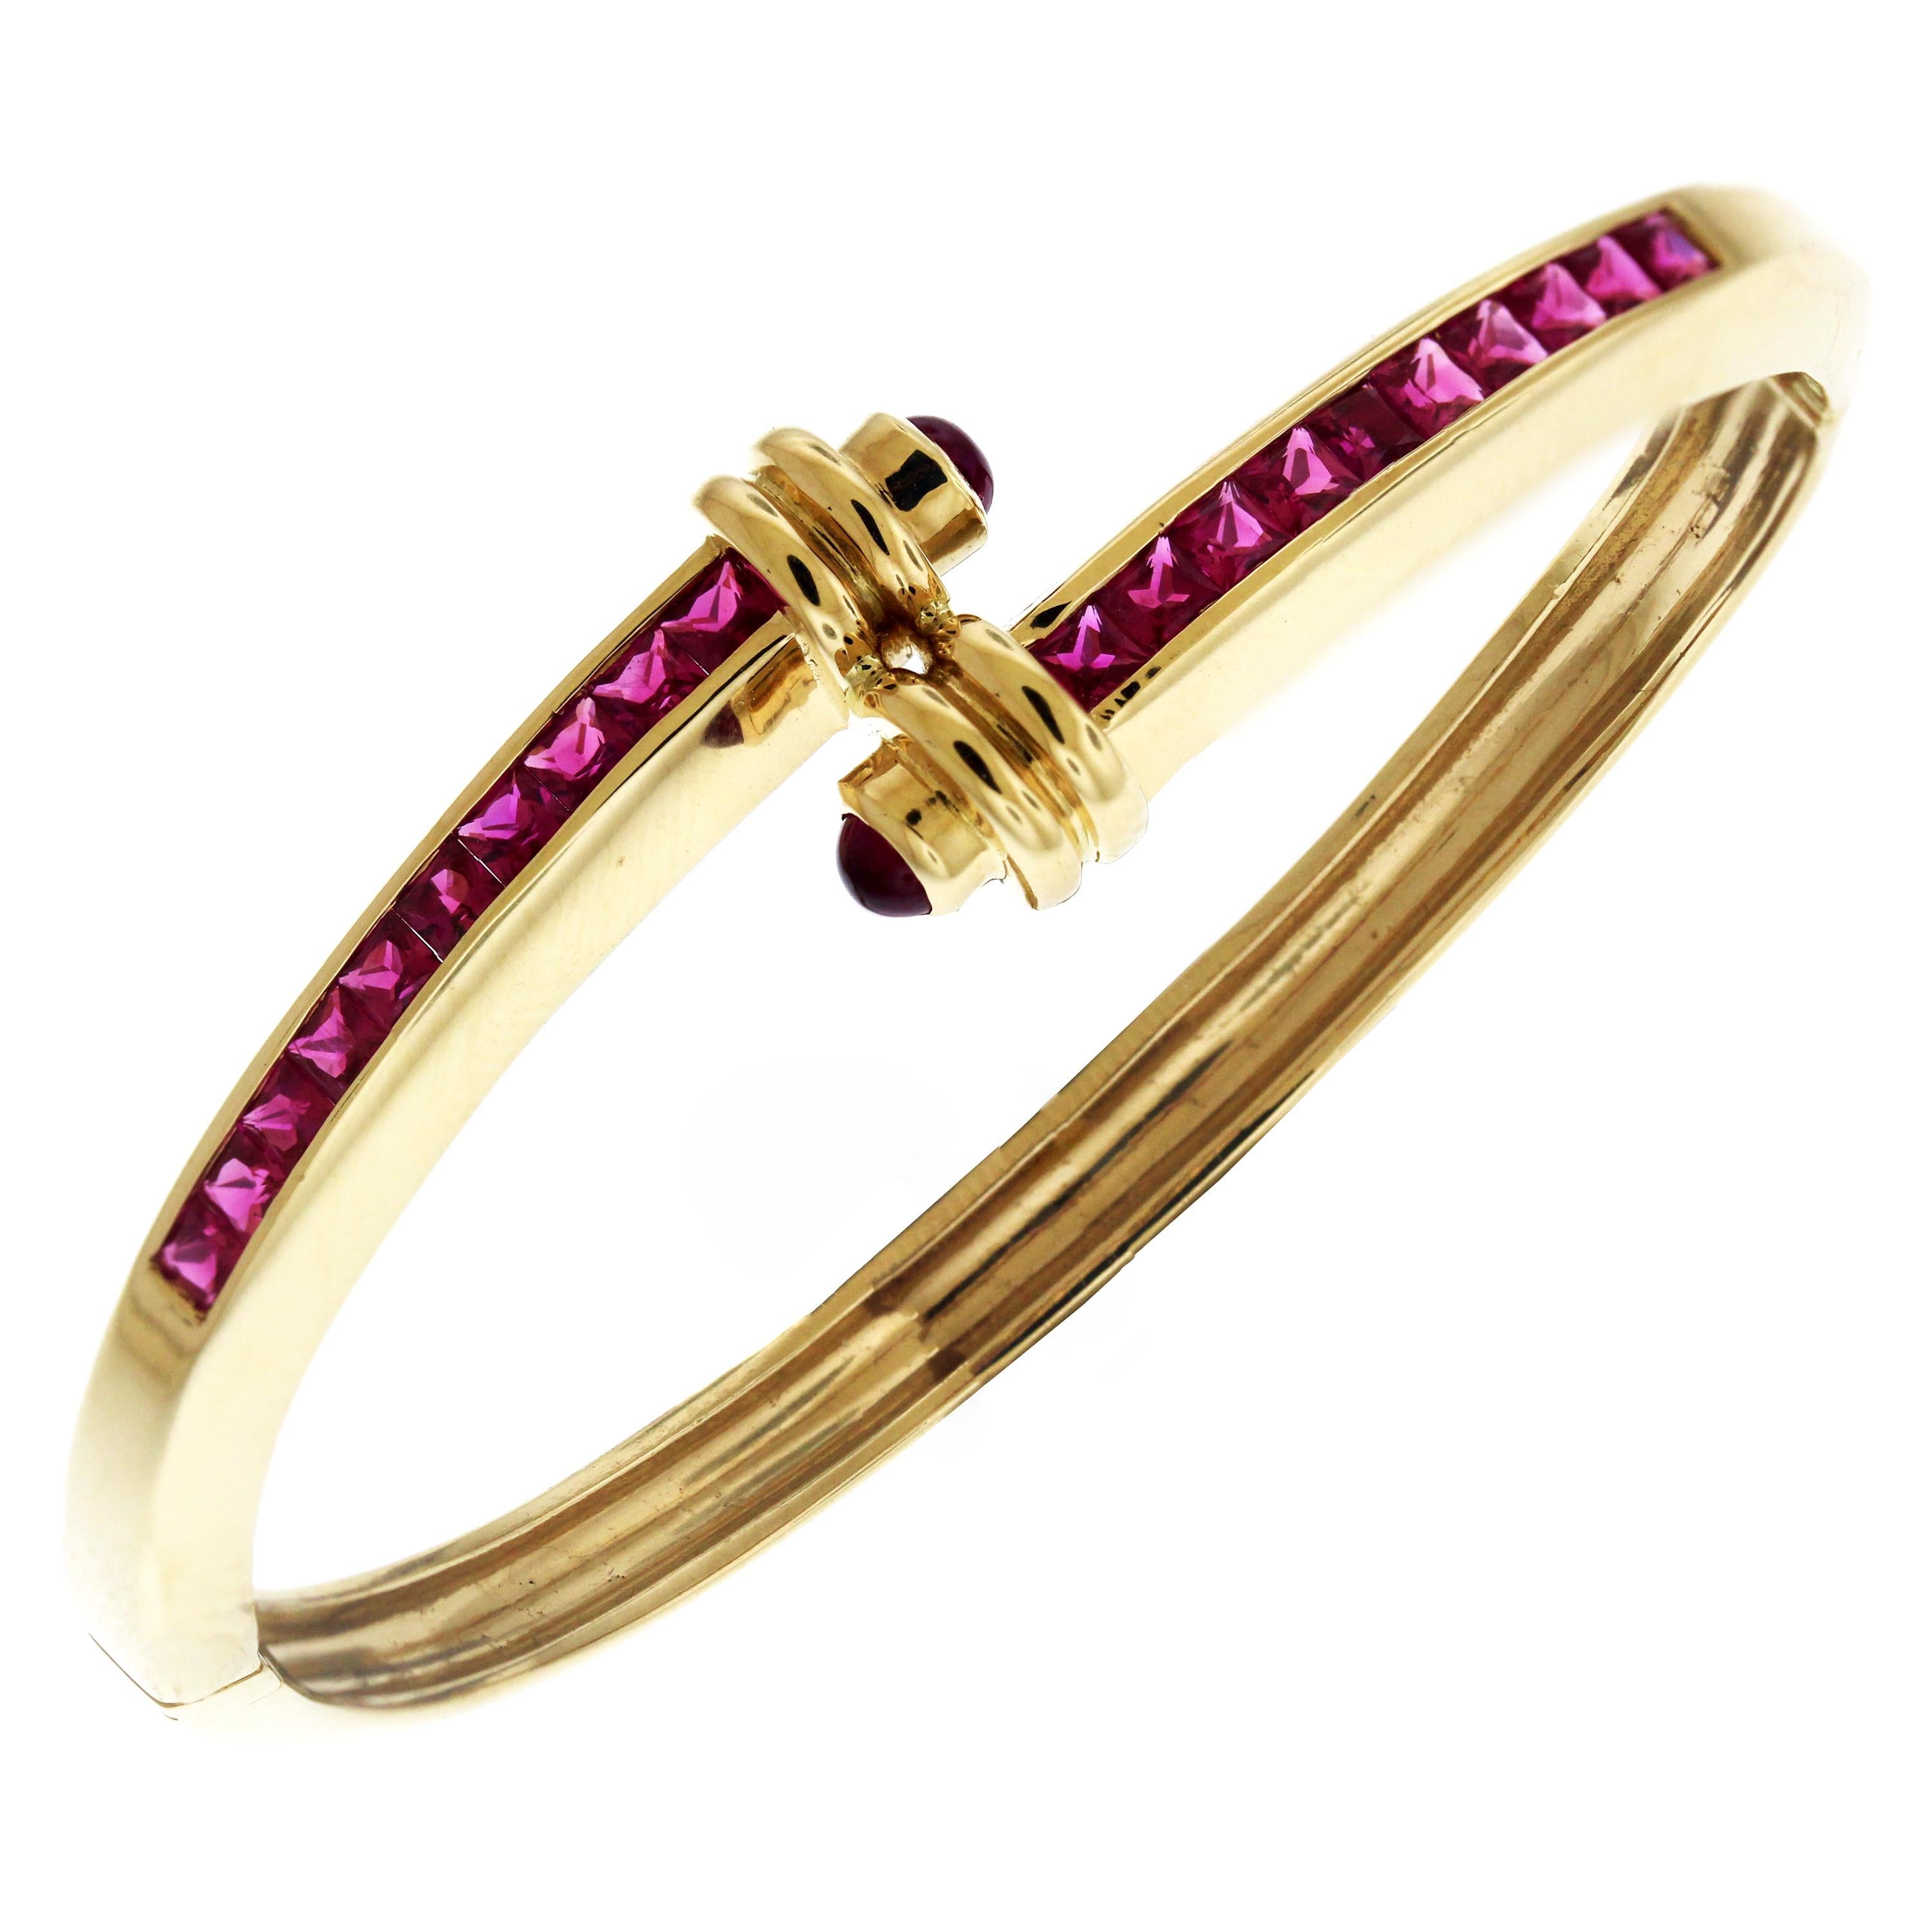 18K Yellow Gold Crossover Bracelet and Ring set with Princess Cut Rubies

Bracelet has 2.50 carat Rubies

Bracelet measures 7 inches in length, 0.25 inch width.

Yellow Gold Ruby and Cabochon Crossover Ring:

18K Yellow Gold Ring with Princess Cut